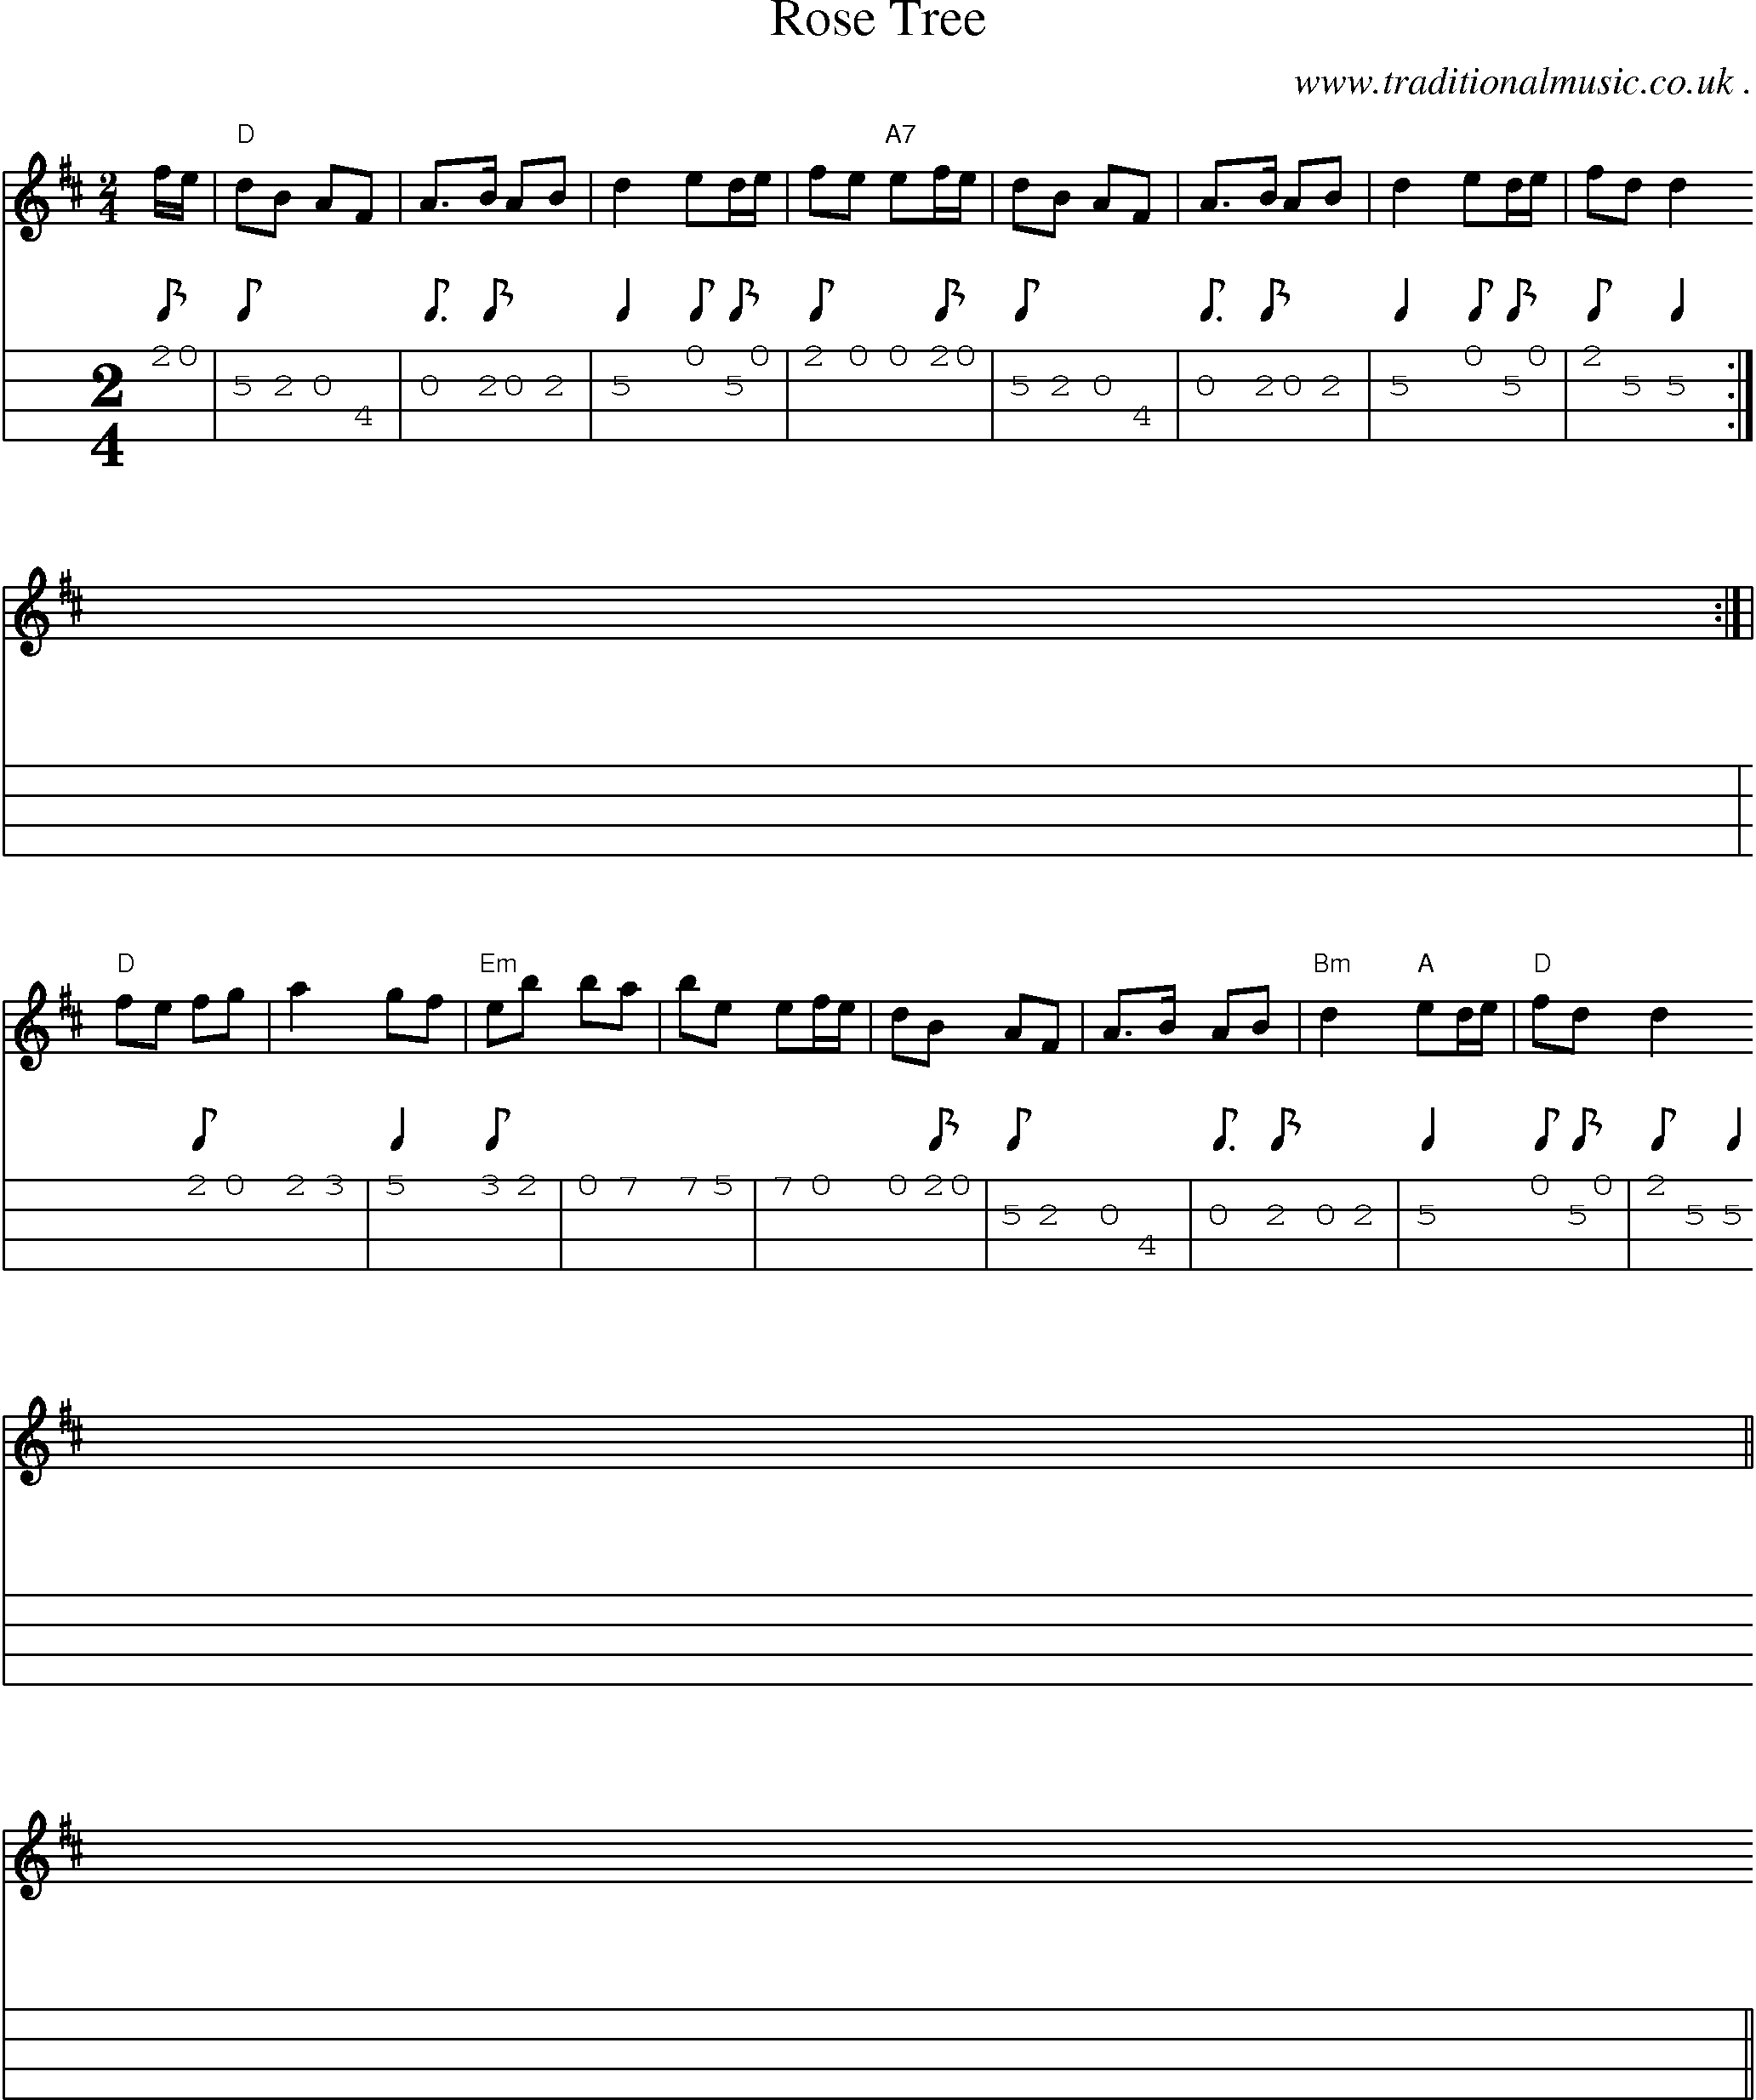 Sheet-music  score, Chords and Mandolin Tabs for Rose Tree